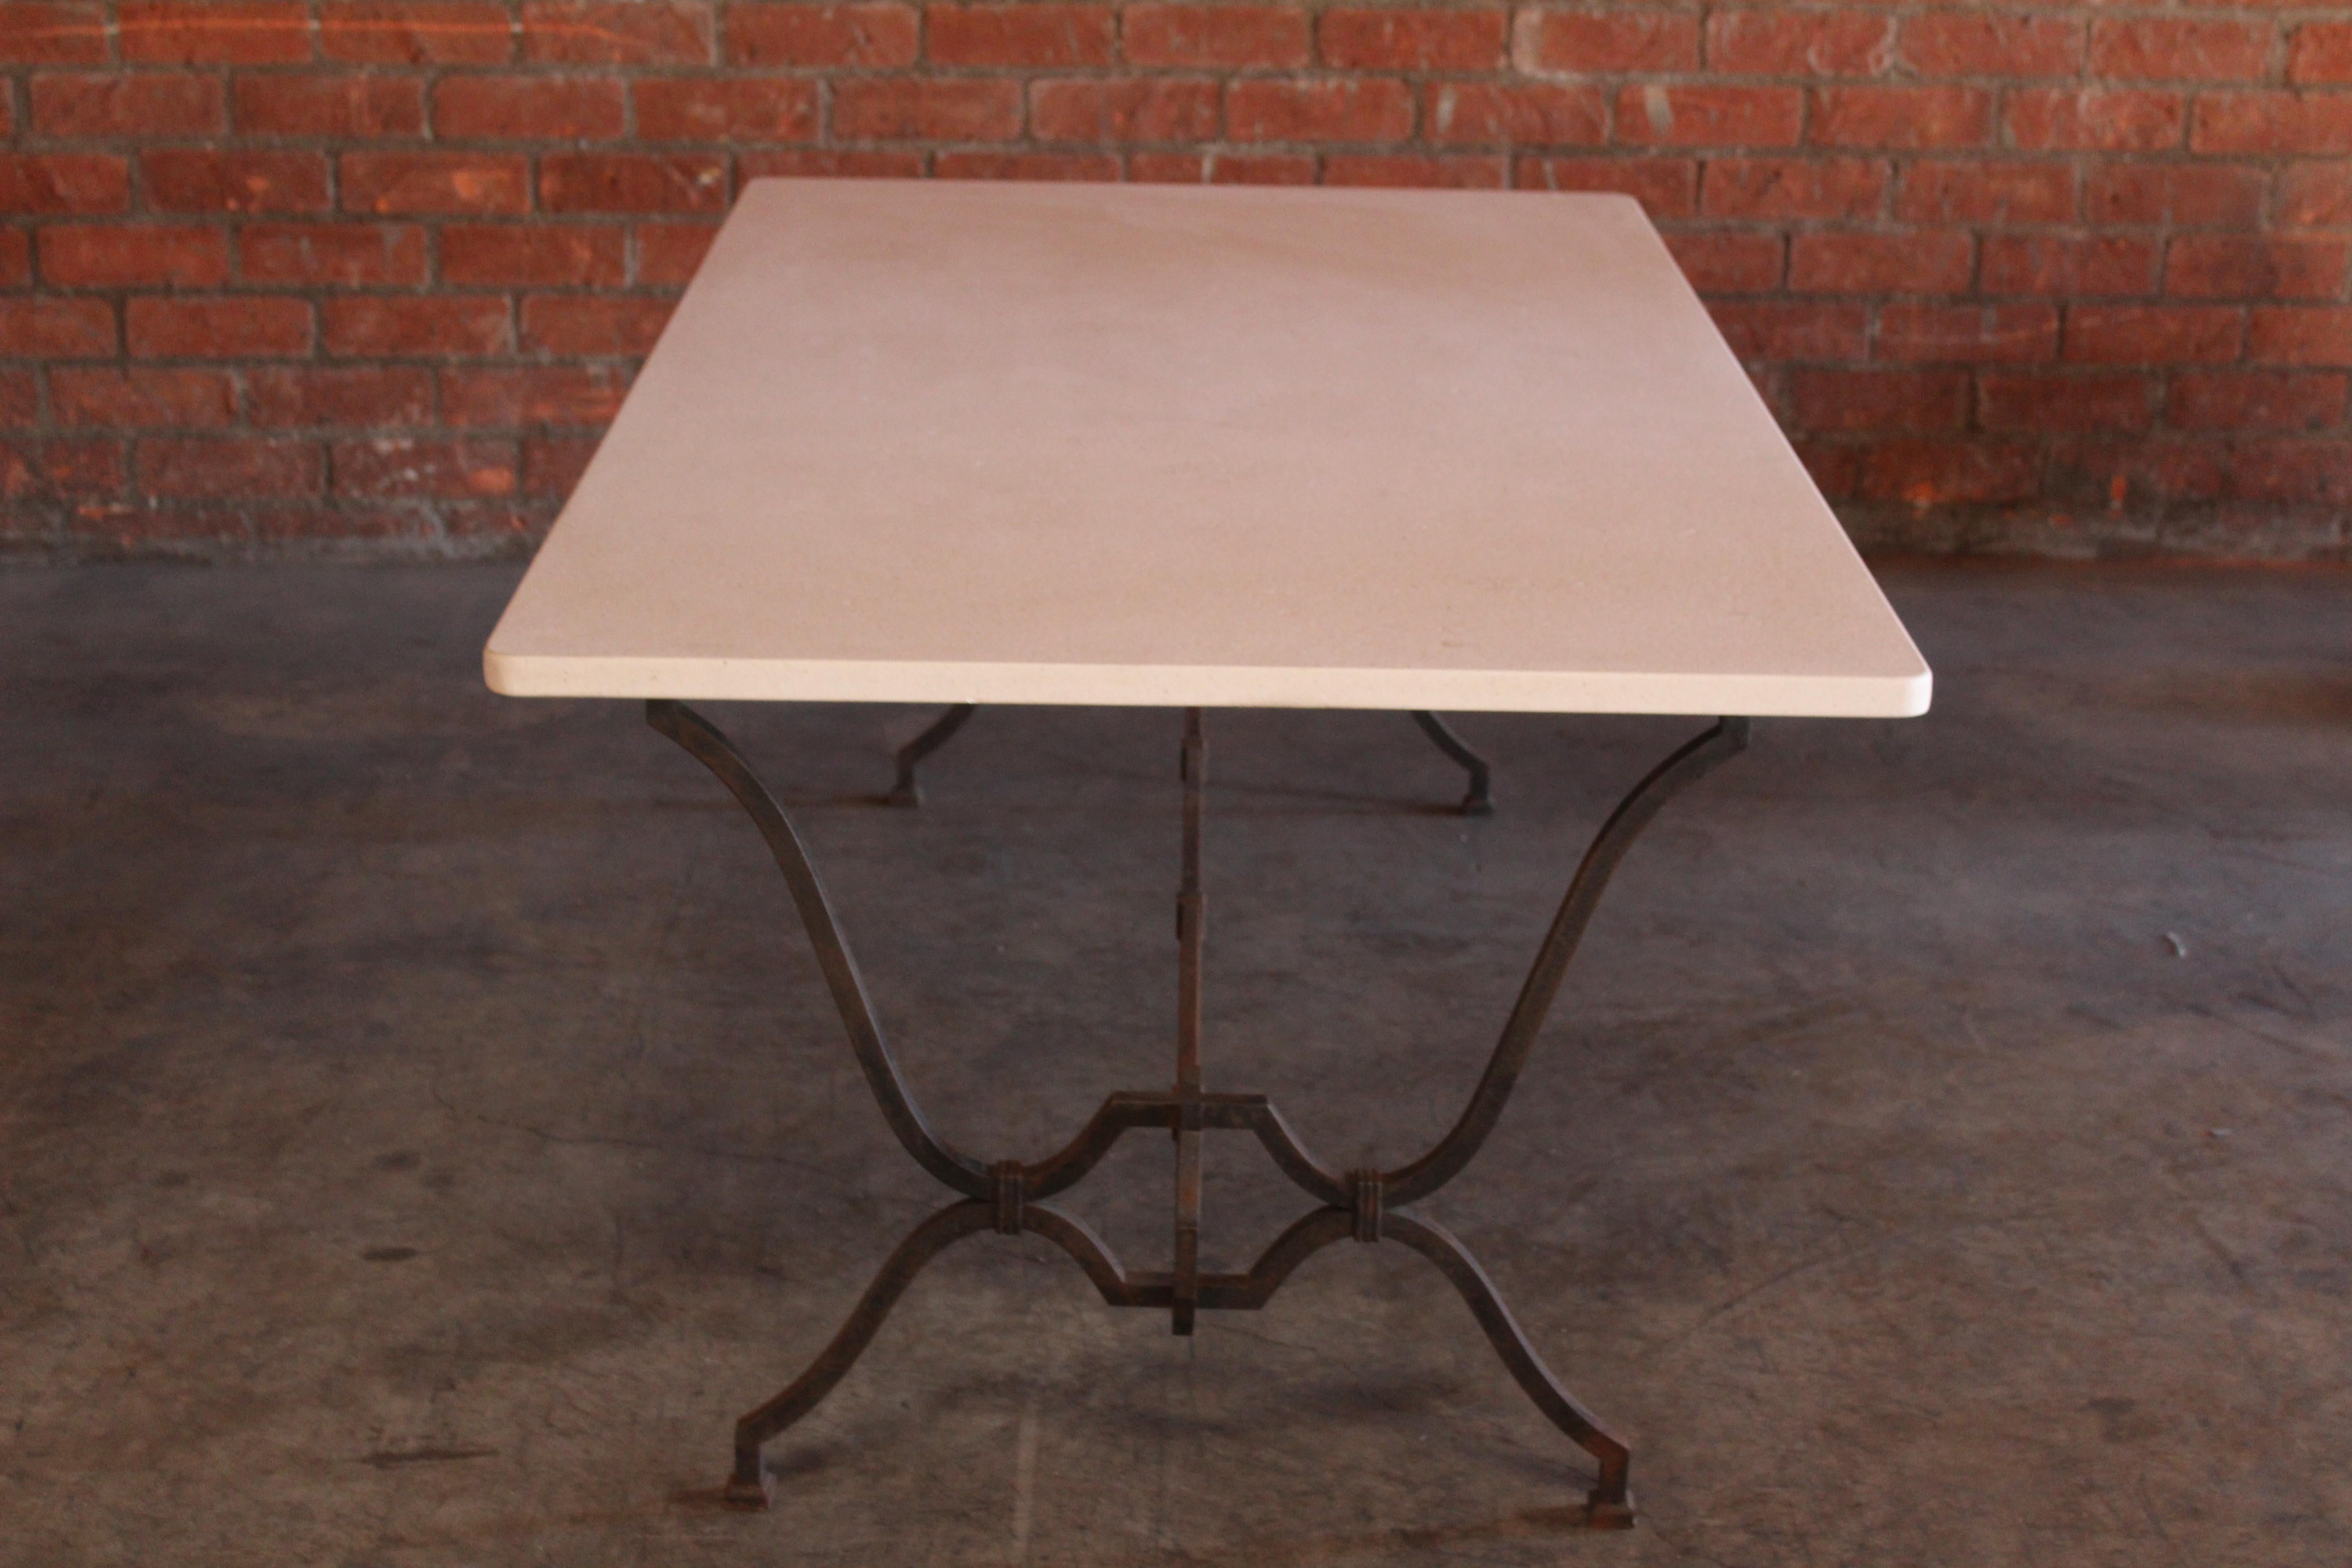 1940s French Wrought Iron and Limestone Table by Colette Gueden for René Prou For Sale 15